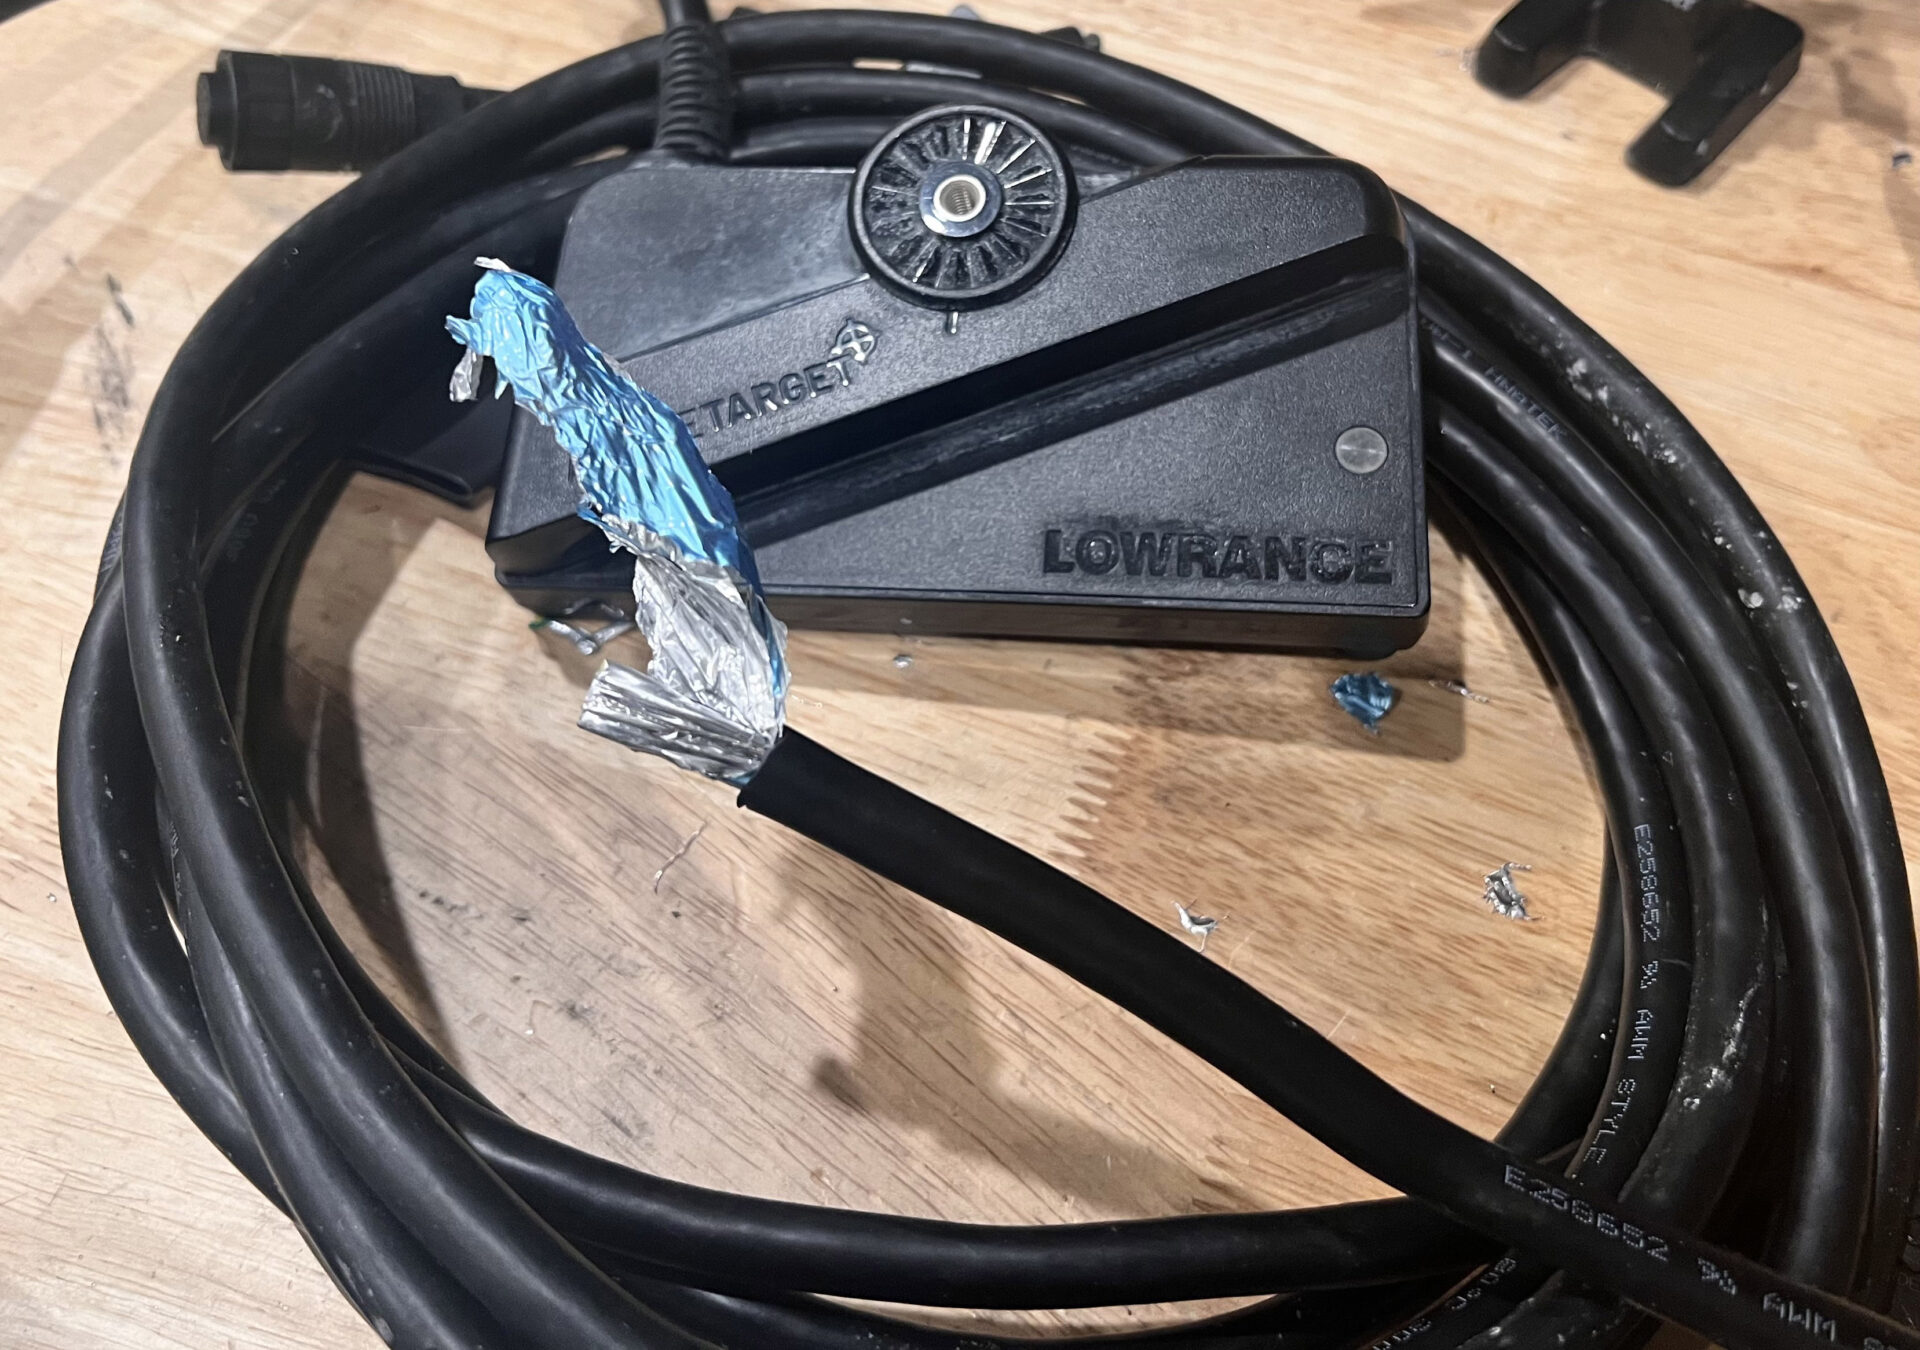 Lowrance Activetarget transducer with a cut cable. (Photo courtesy Joey Cook)